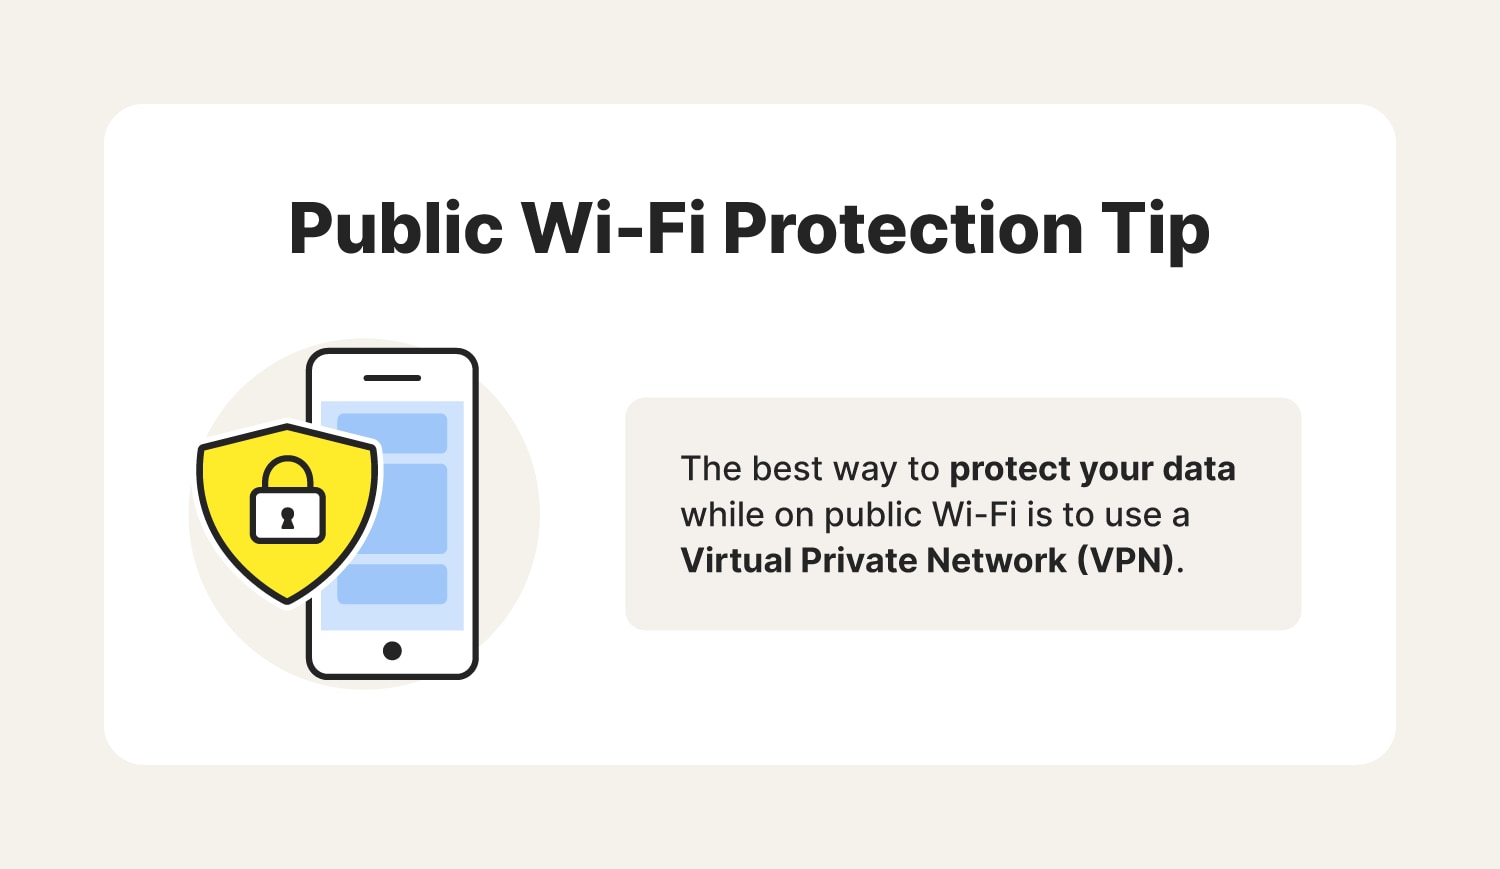 Graphic sharing a tip on how to protect your data while using public Wi-Fi.